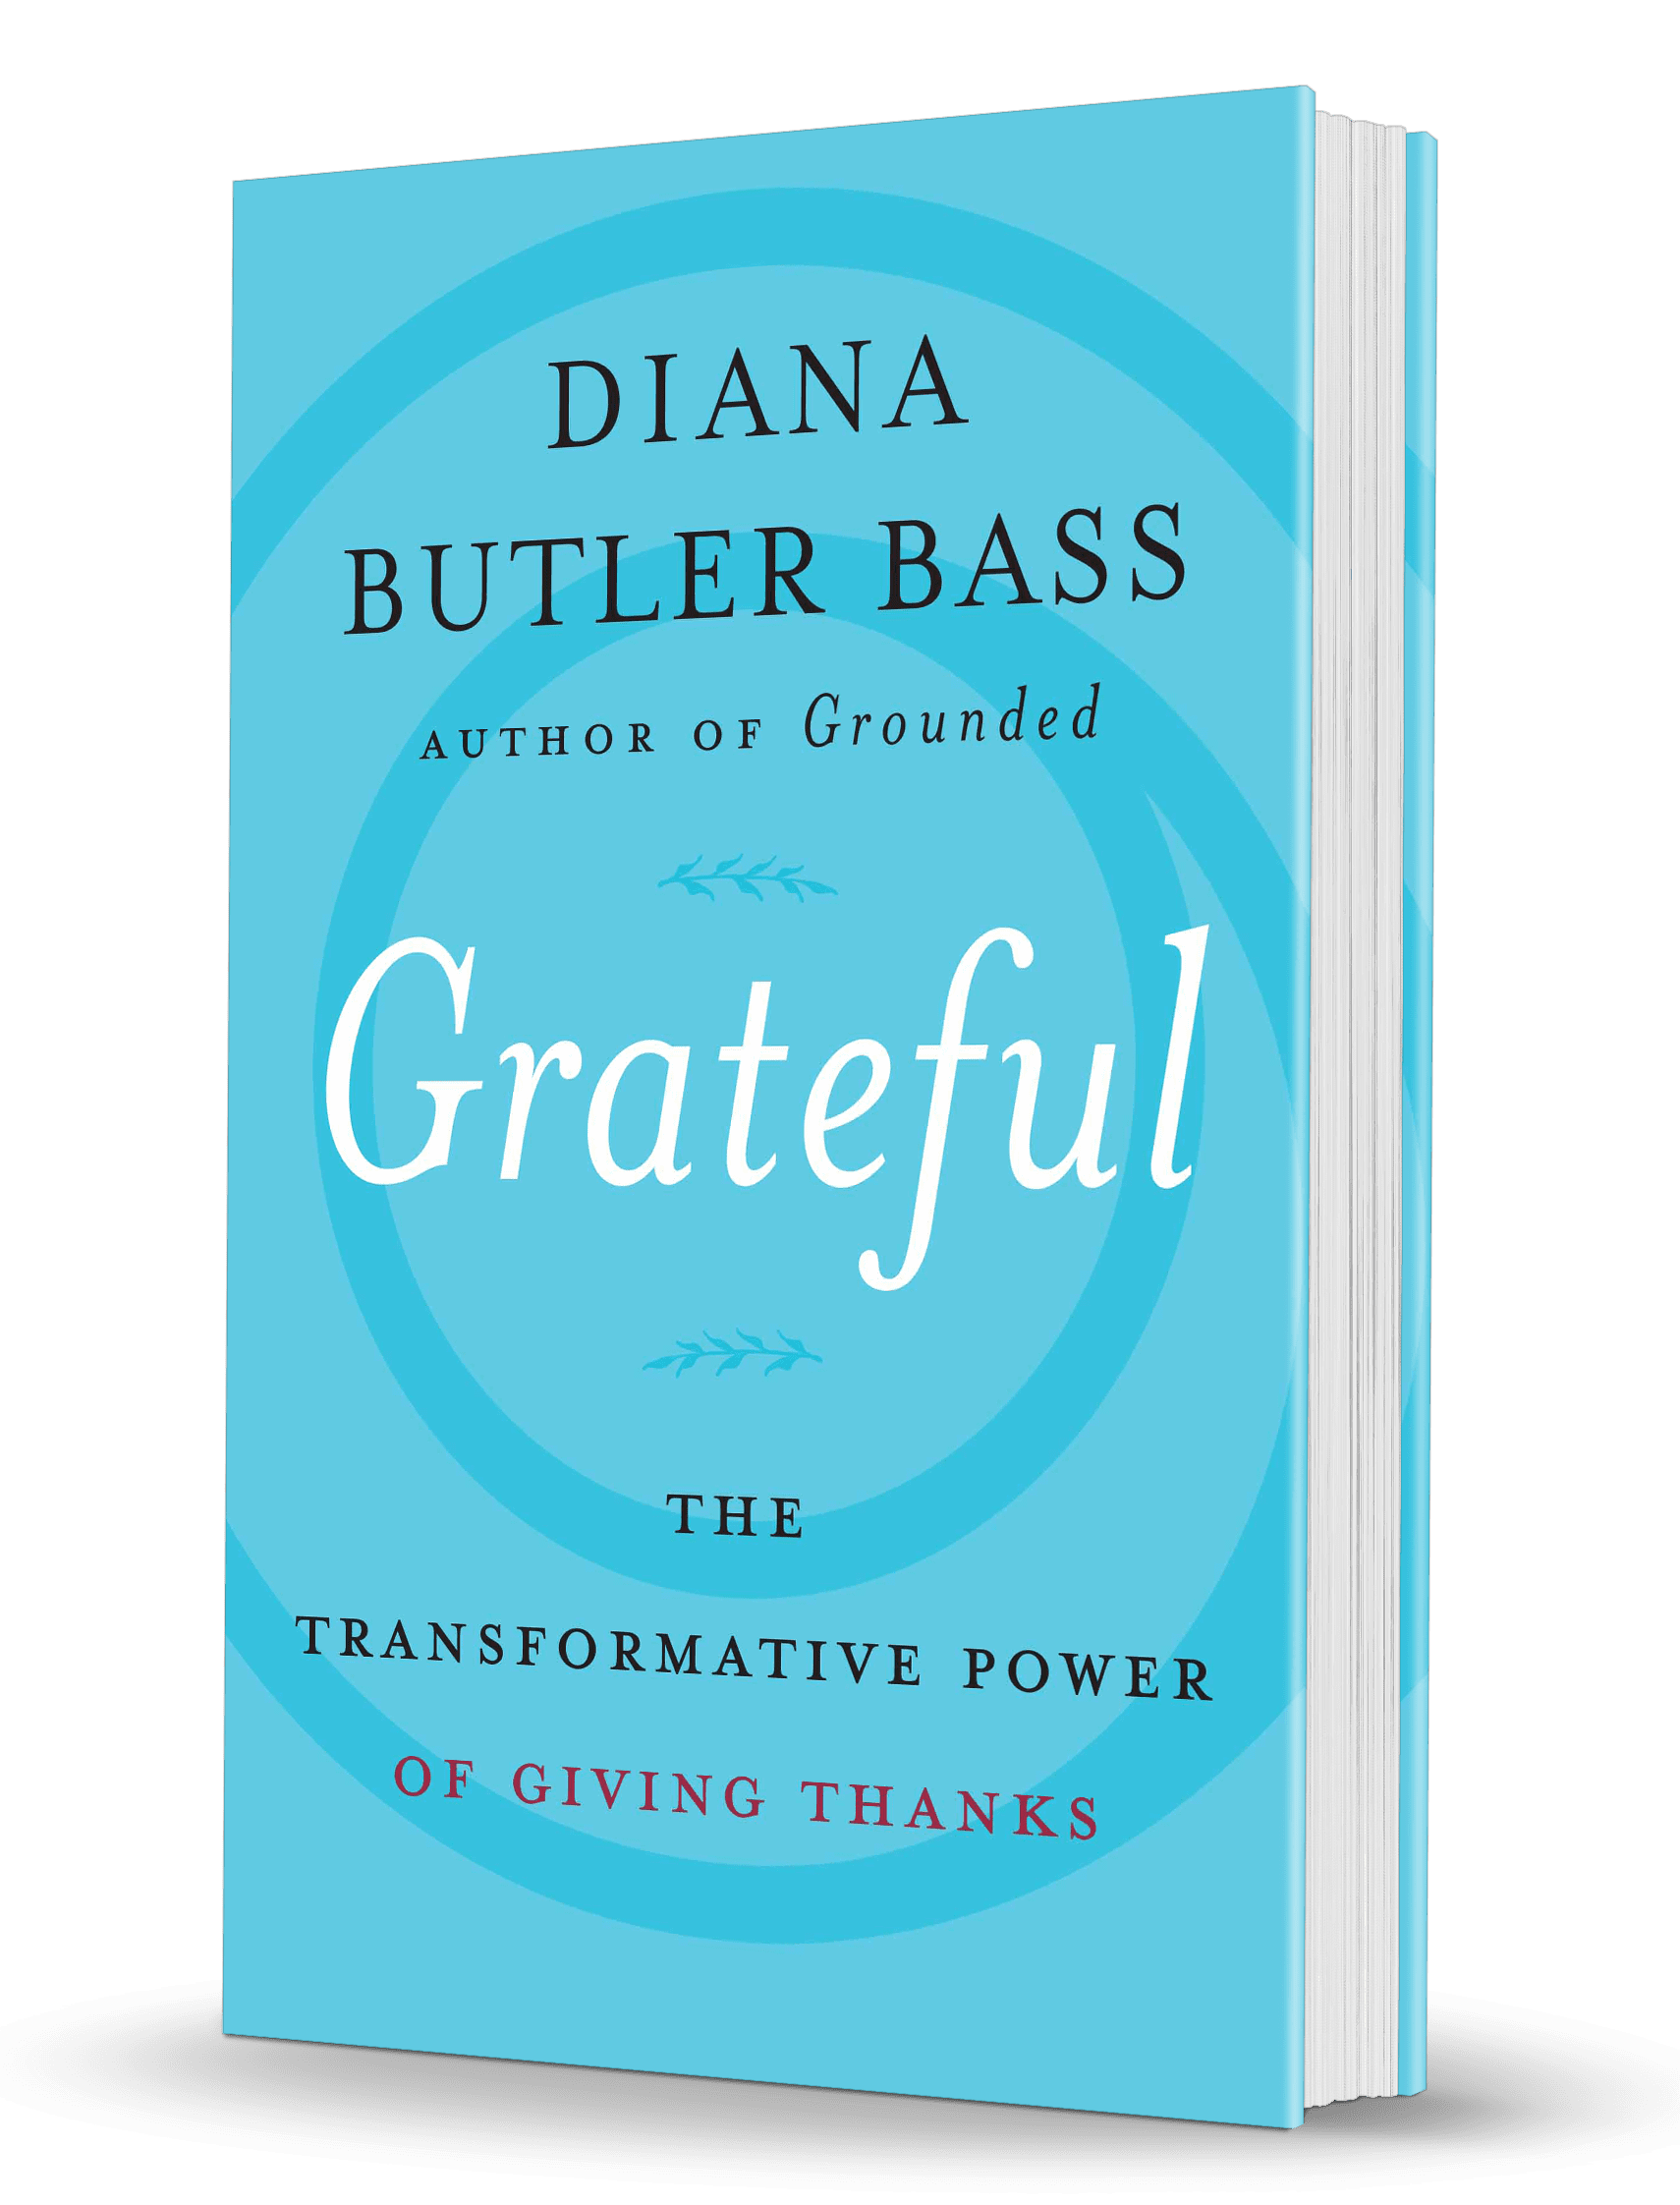 Greatful by Diana Butler Bass Book Cover